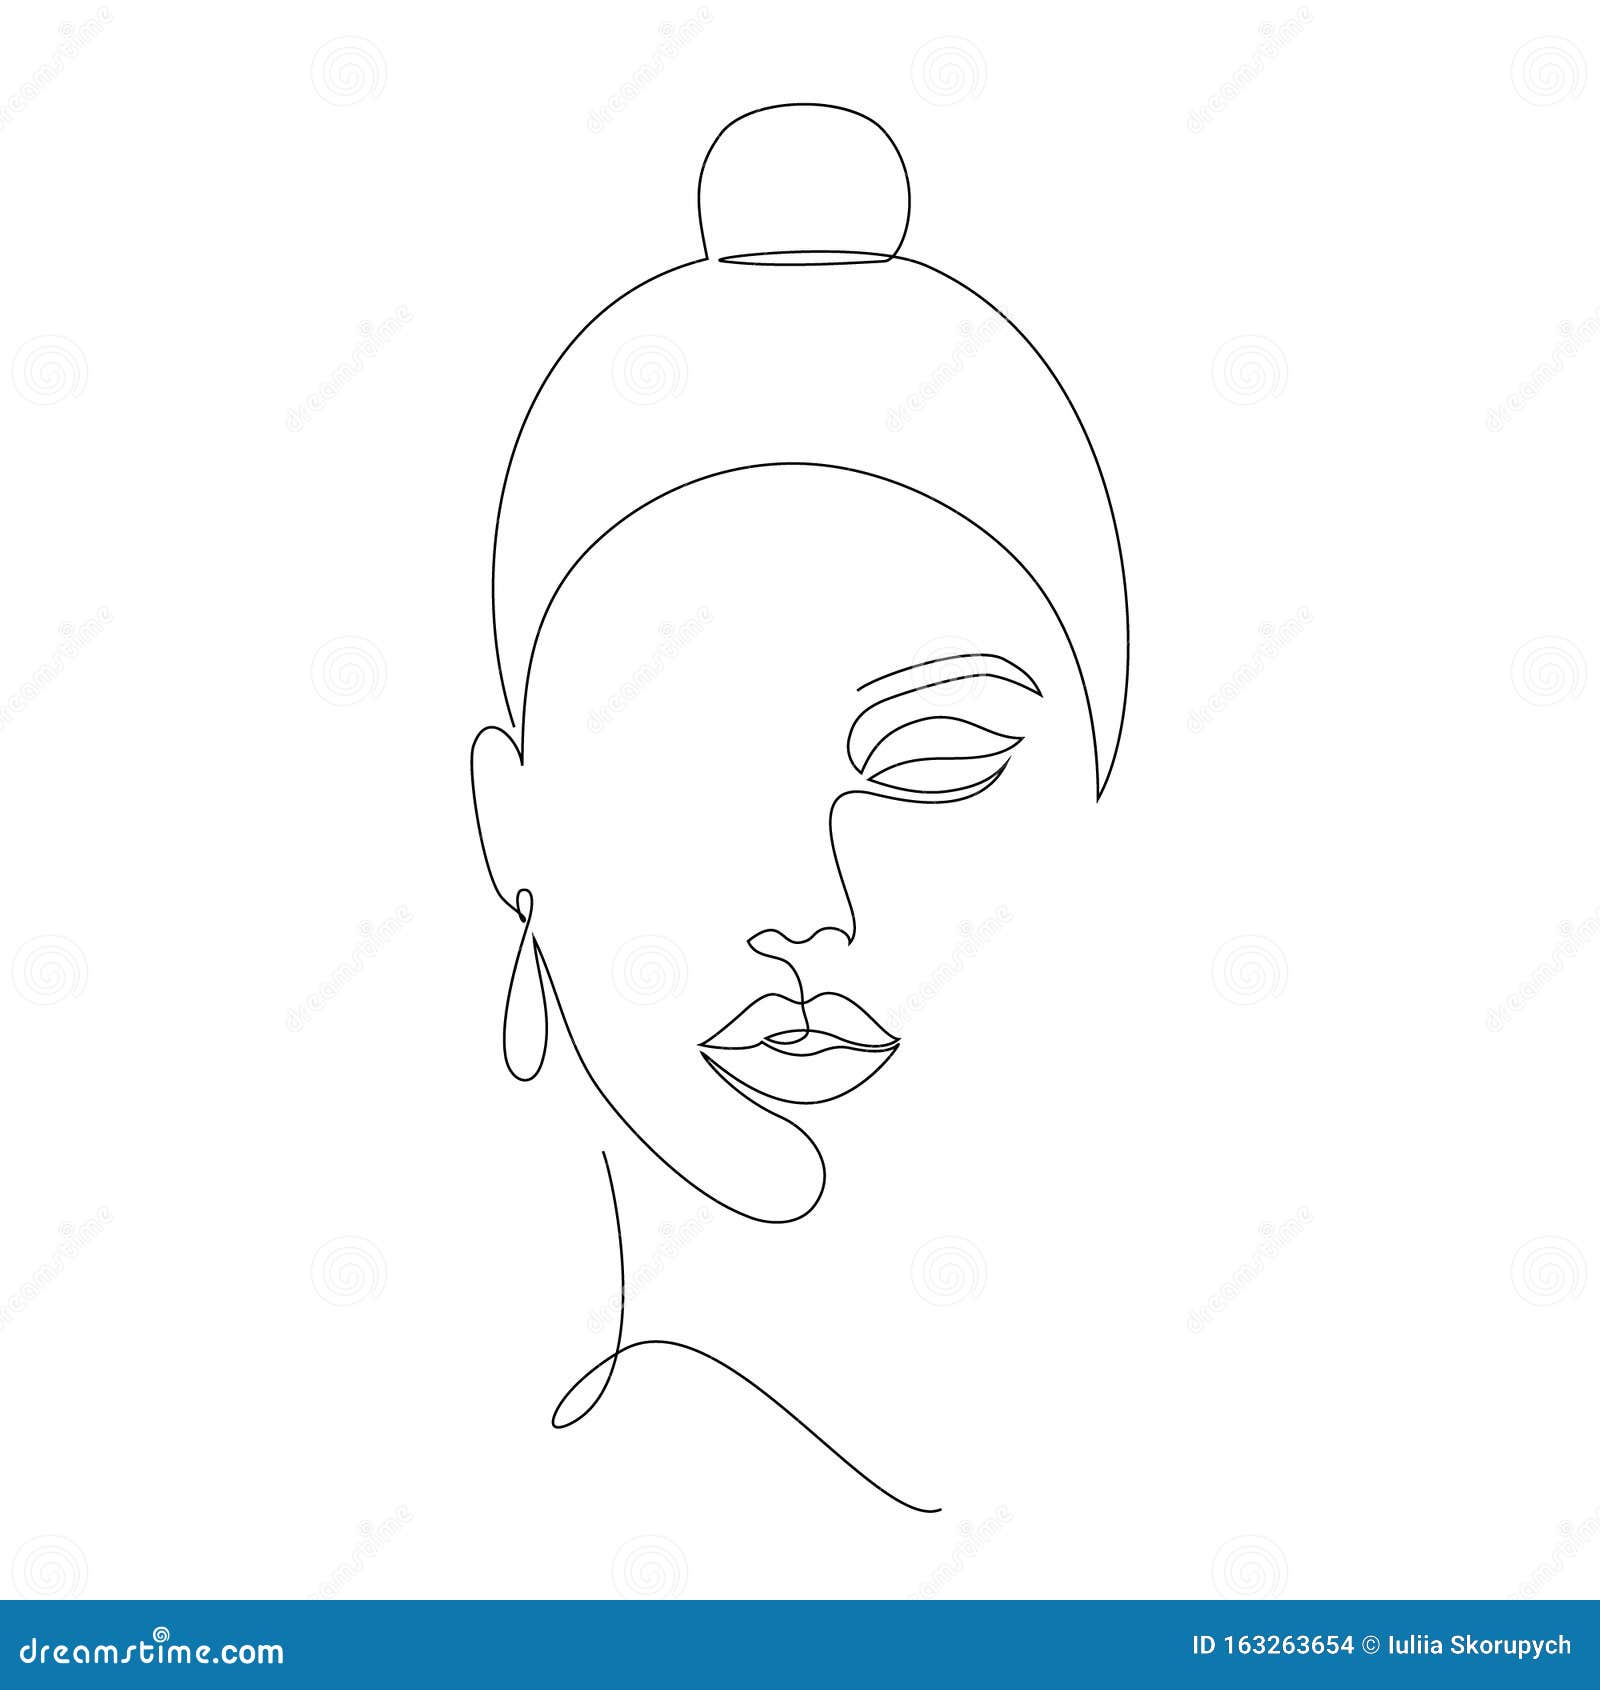 Premium Vector  Woman face continuous line drawing abstract minimal woman  portrait for logo print or tattoo